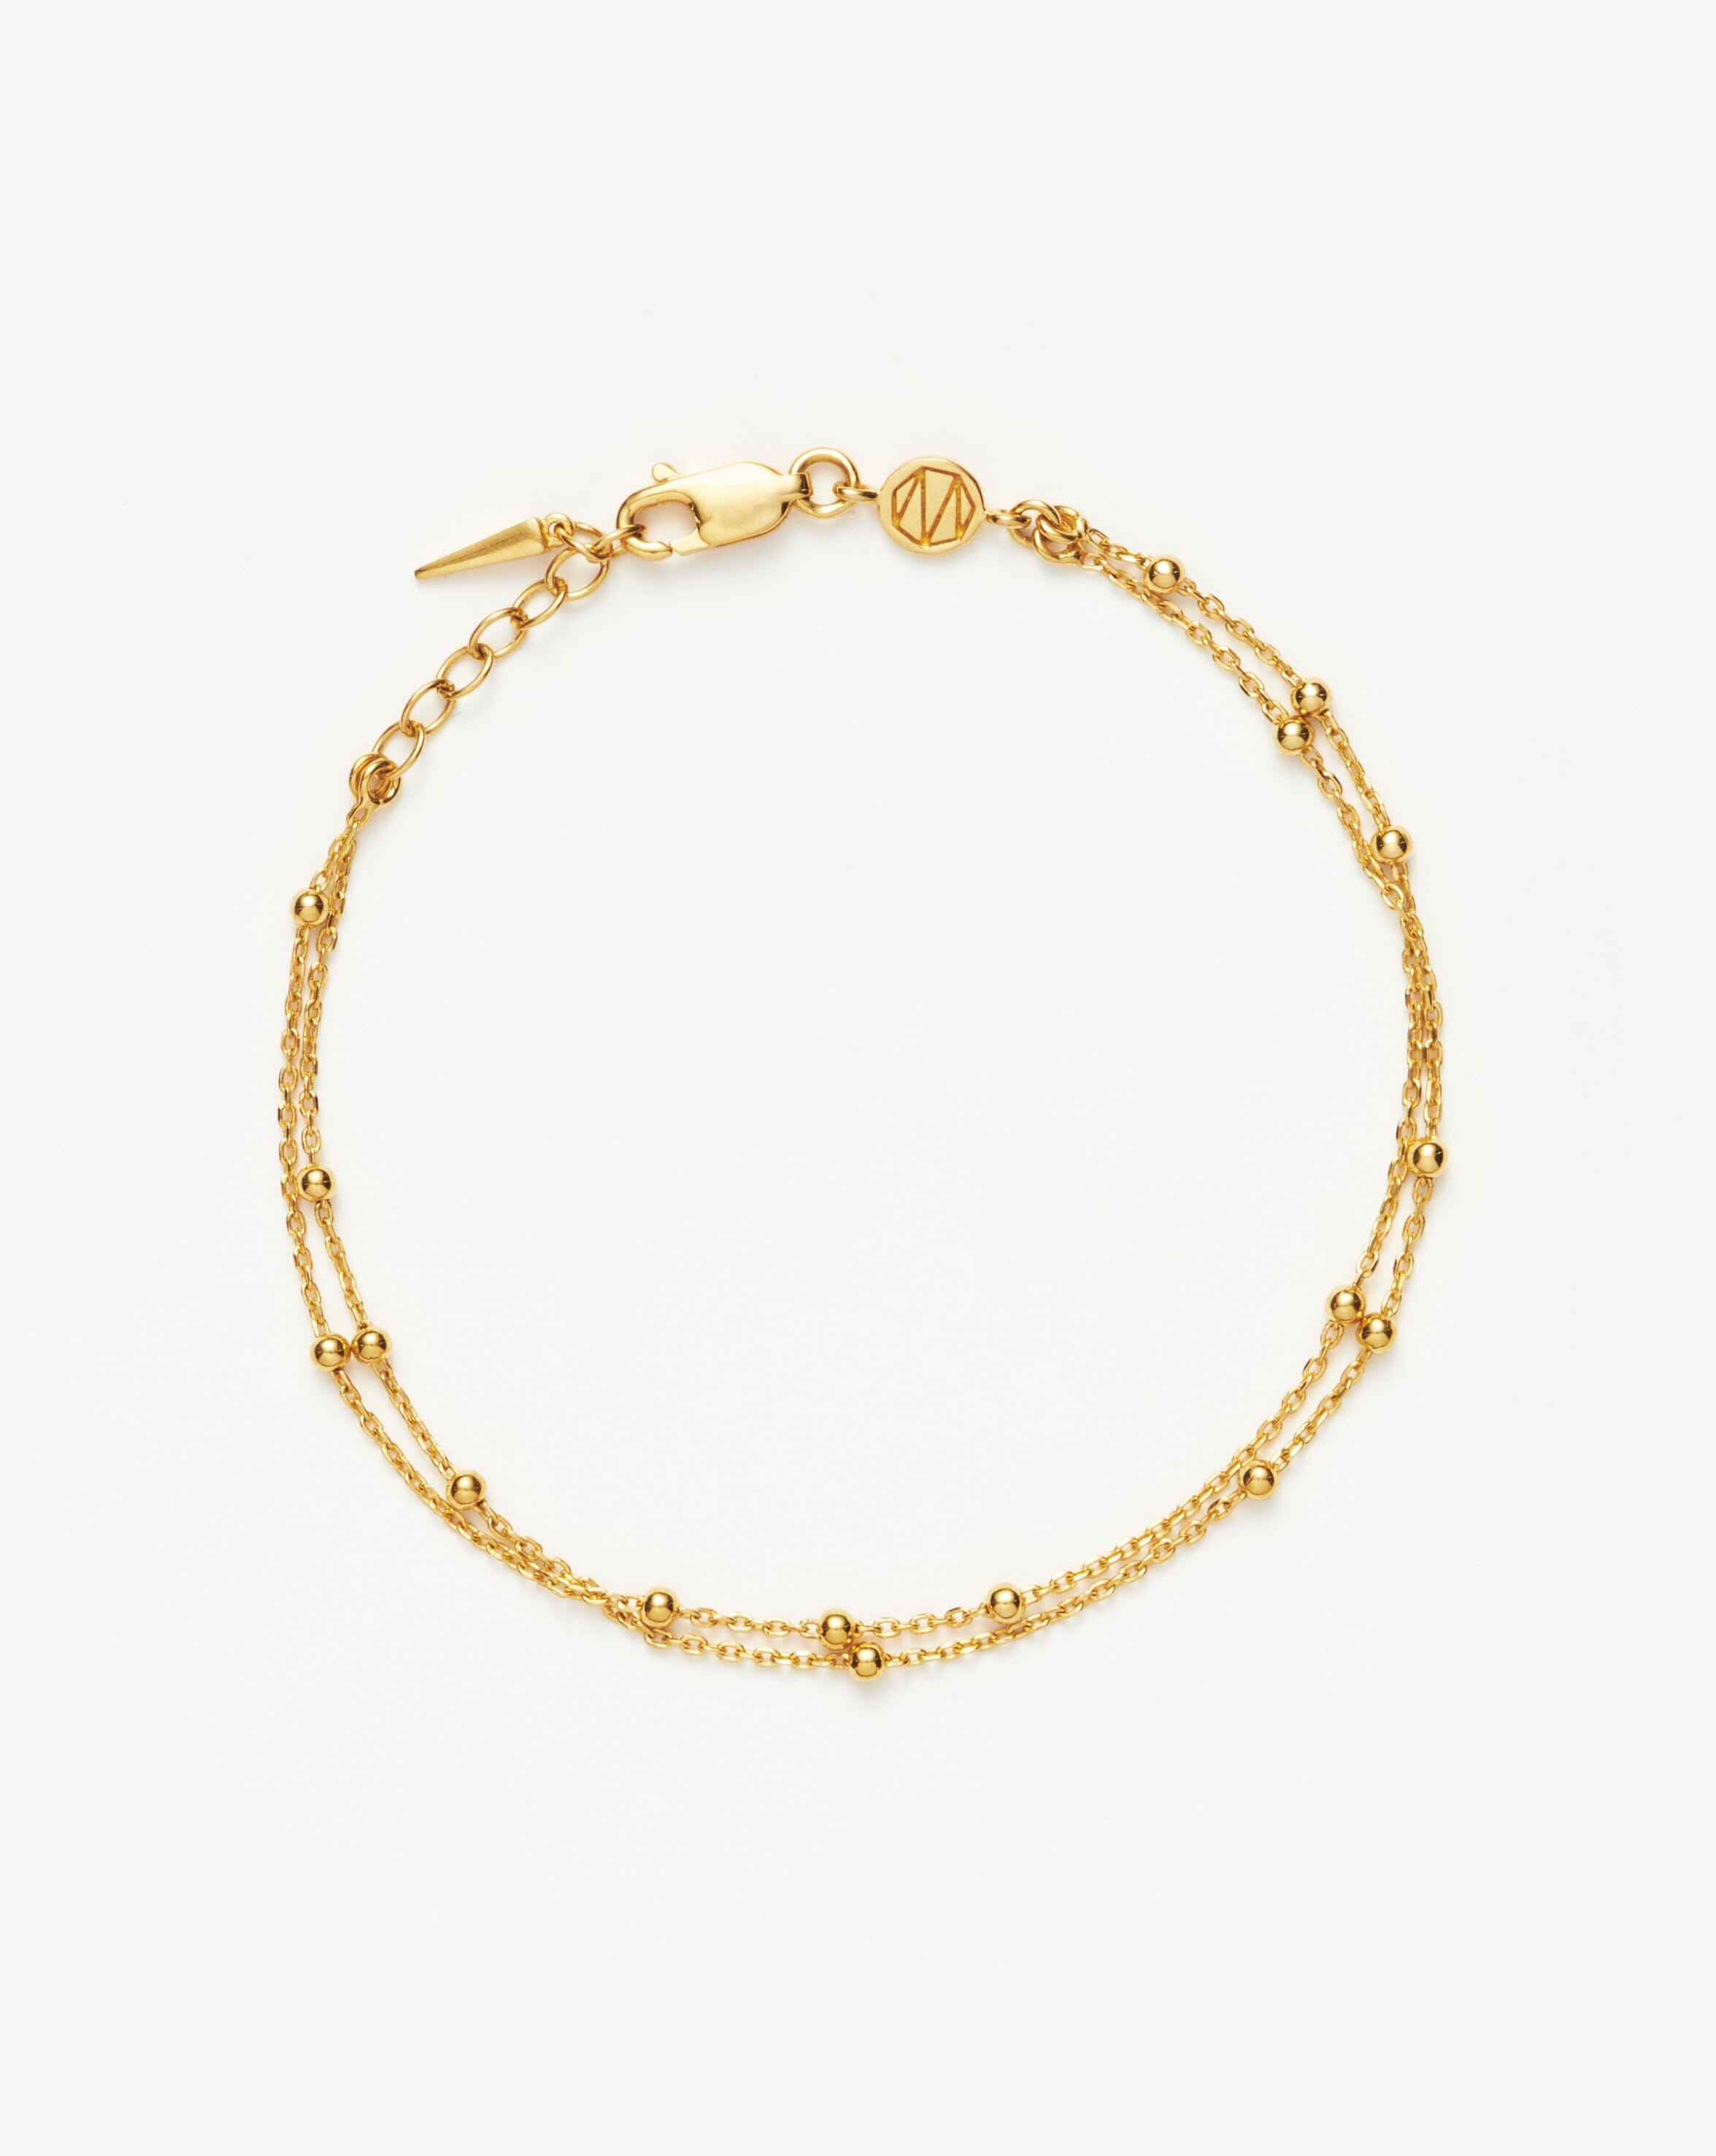 Missoma Double Chain Bracelet in Gold at Nordstrom